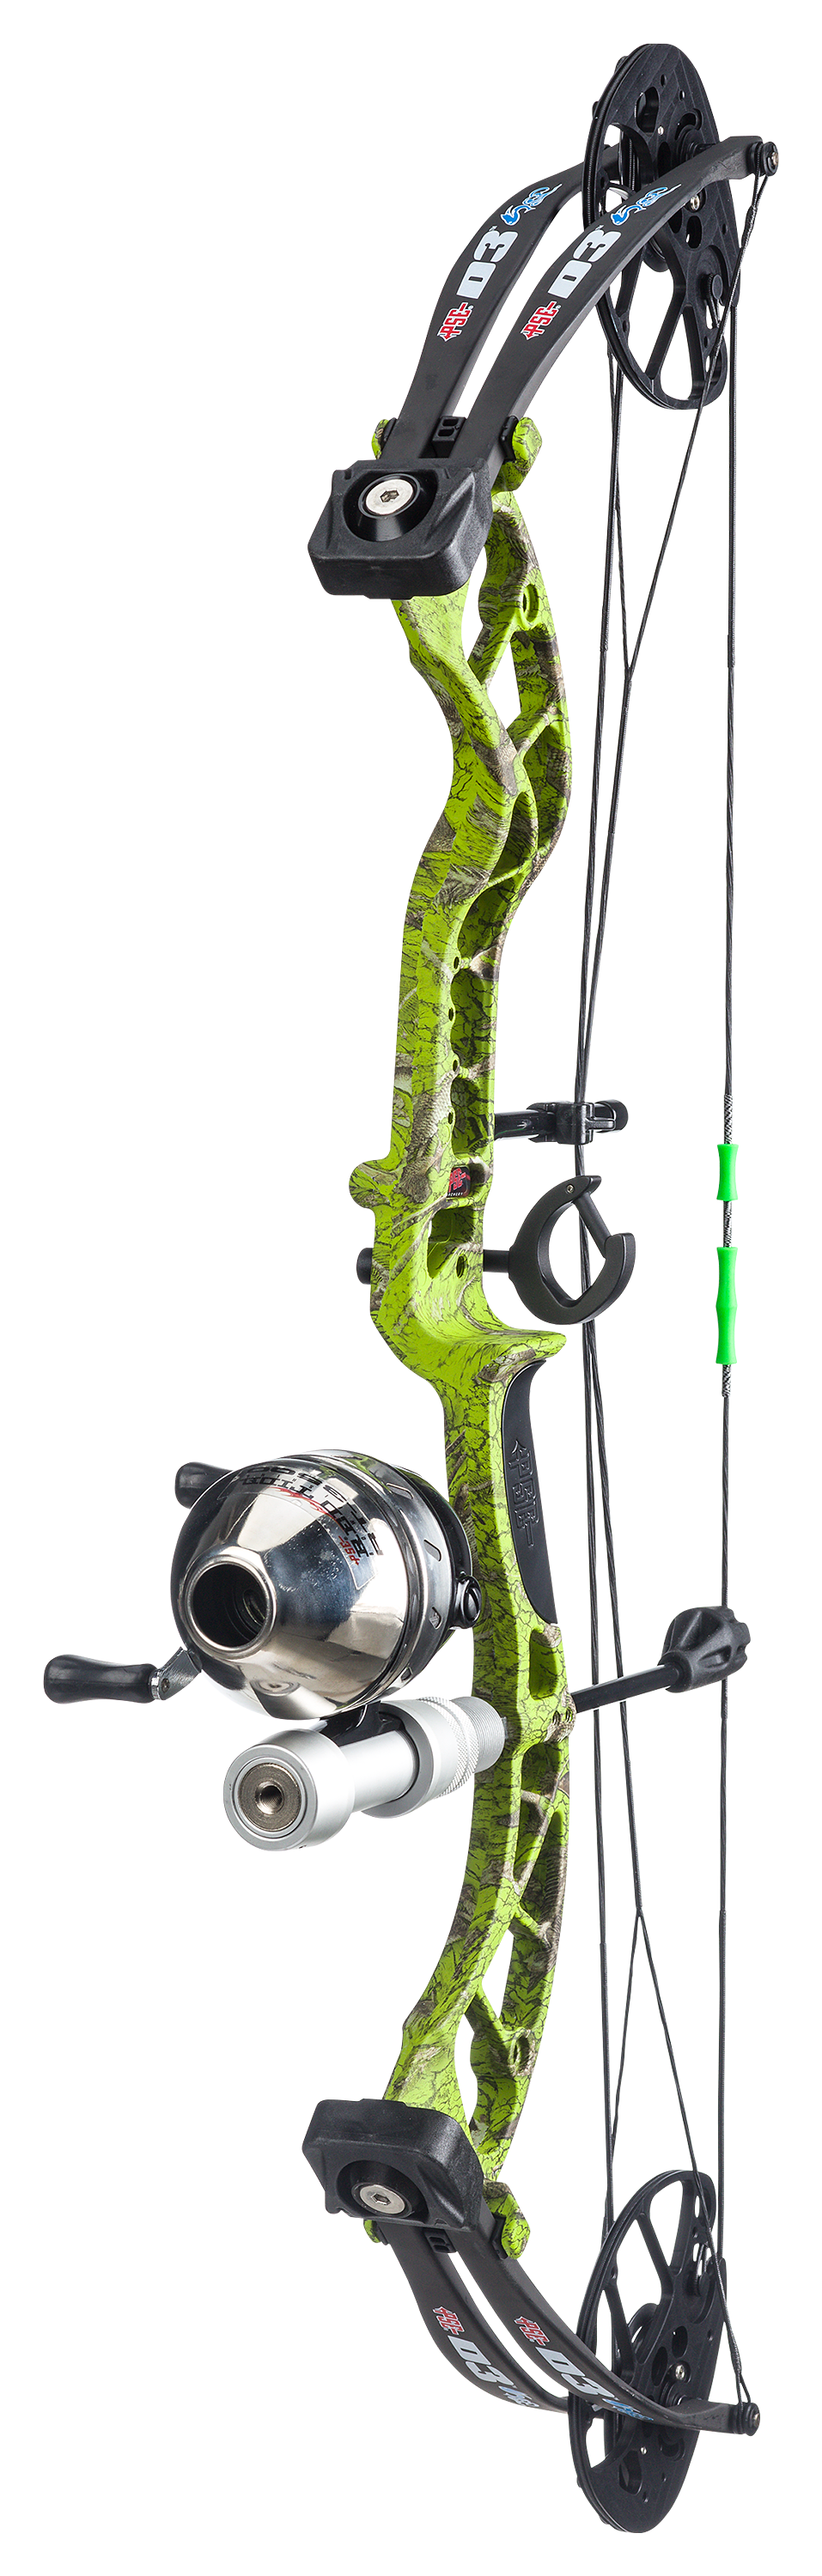 PSE Archery D3 Bowfishing Compound Bow Green Reel Package 40Lbs Right Hand  New – Dogma Escuela de Negocios